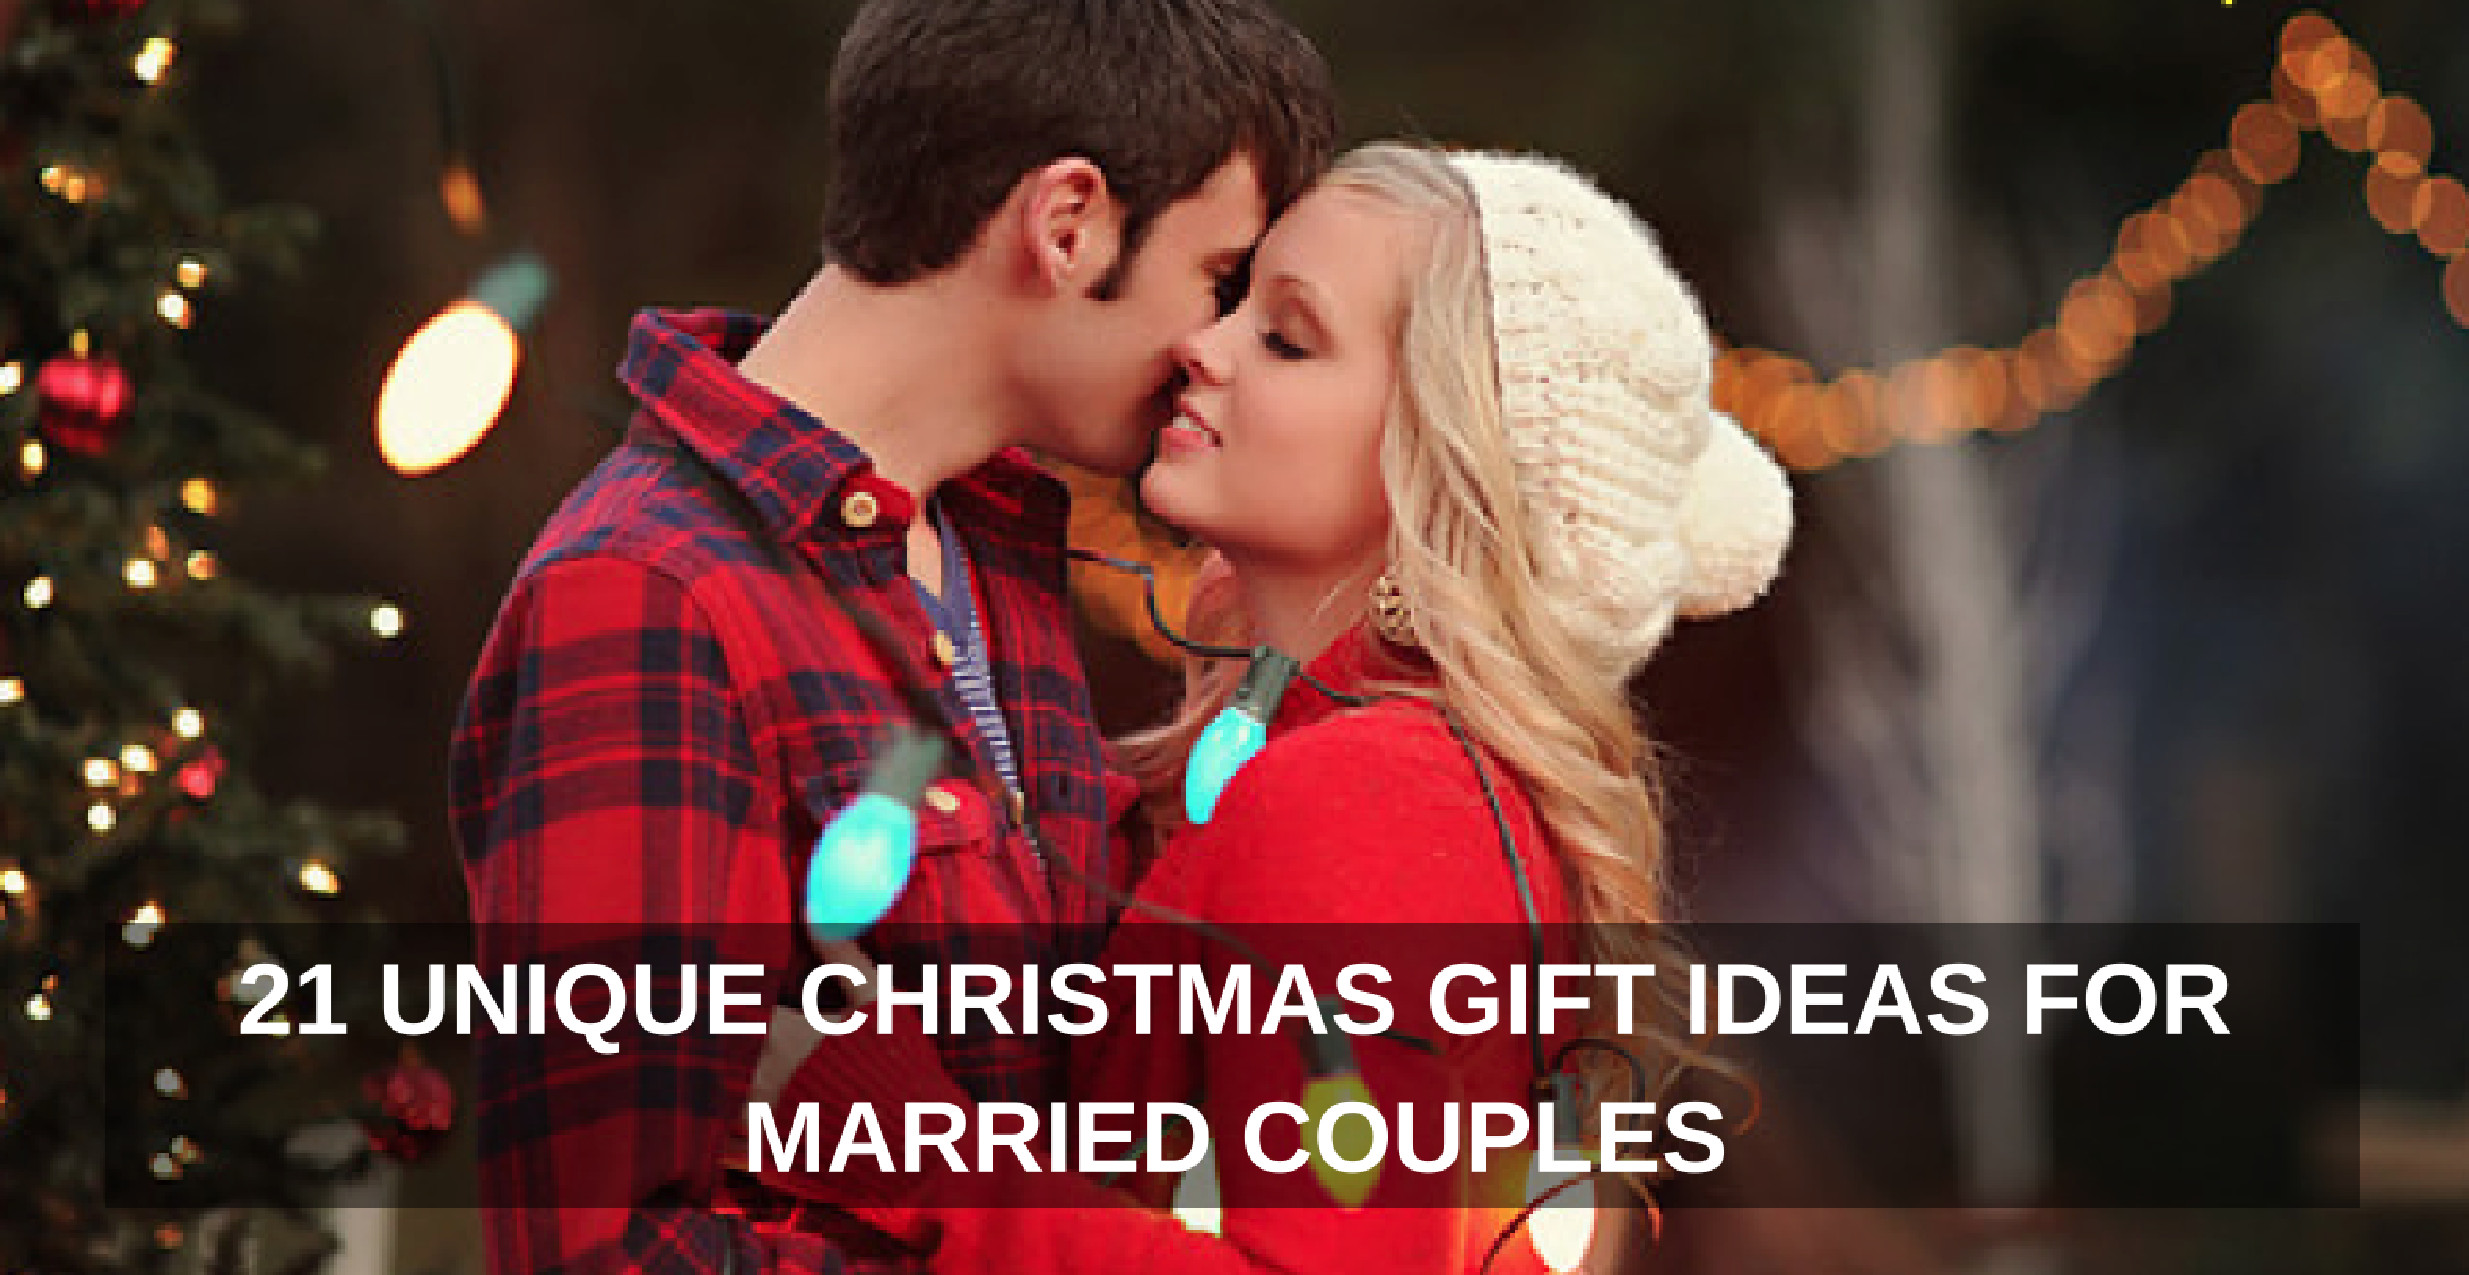 Couples Xmas Gift Ideas
 21 Unique Christmas Gift Ideas for Married Couples